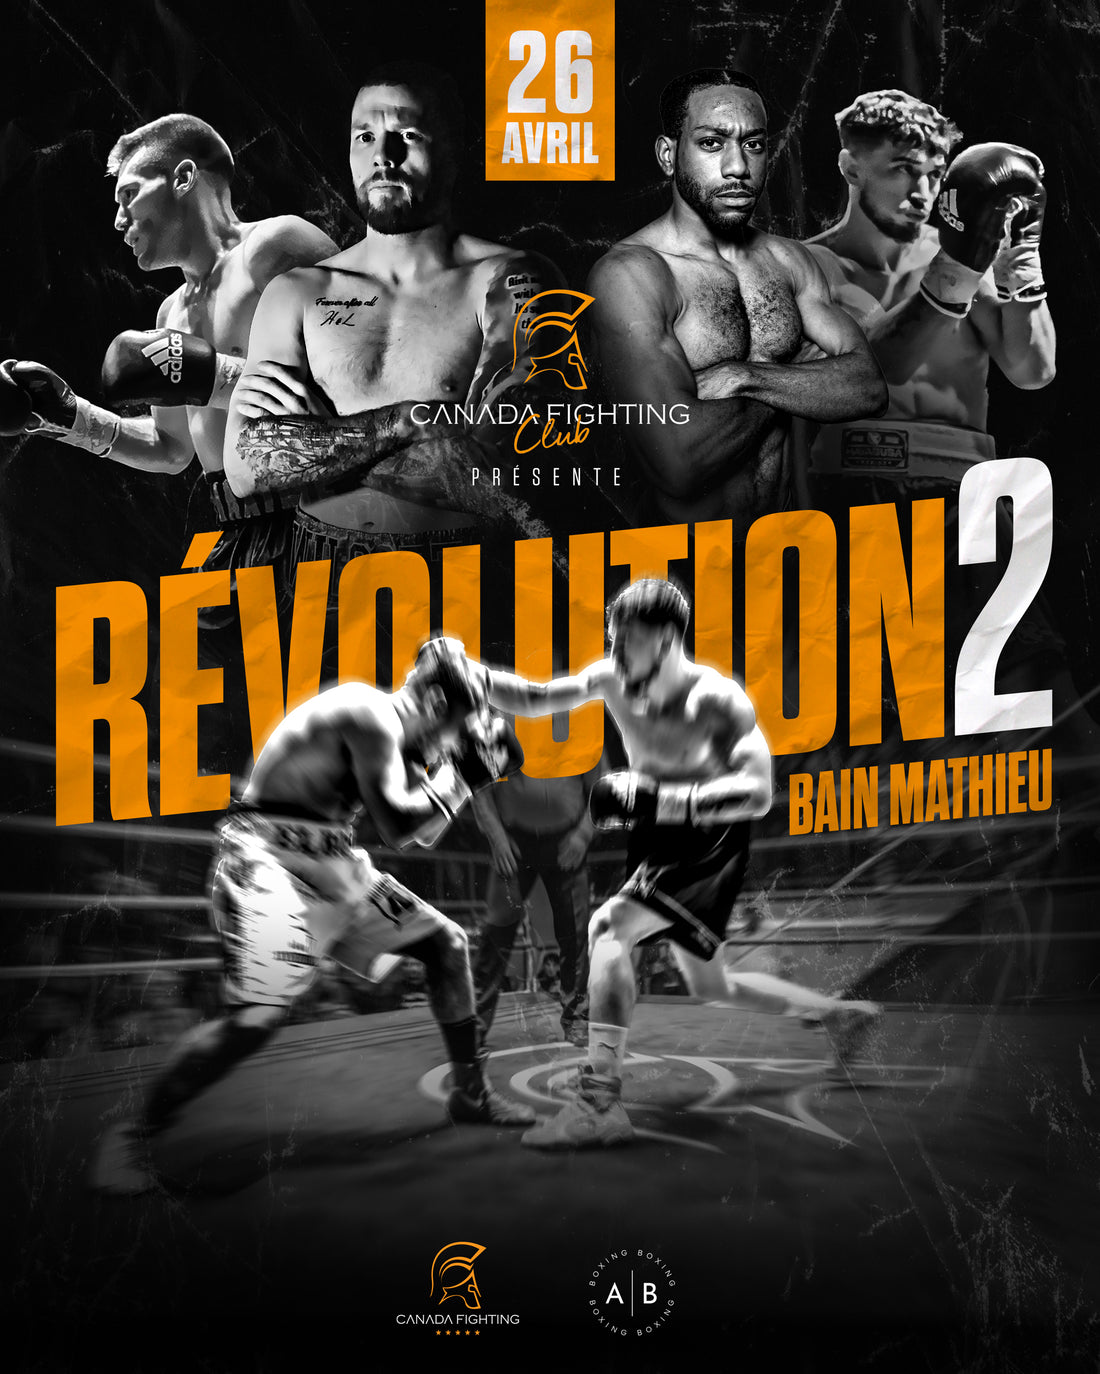 Revolution 2 Boxing Gala at Bain Mathieu presented by Canada Fighting Club